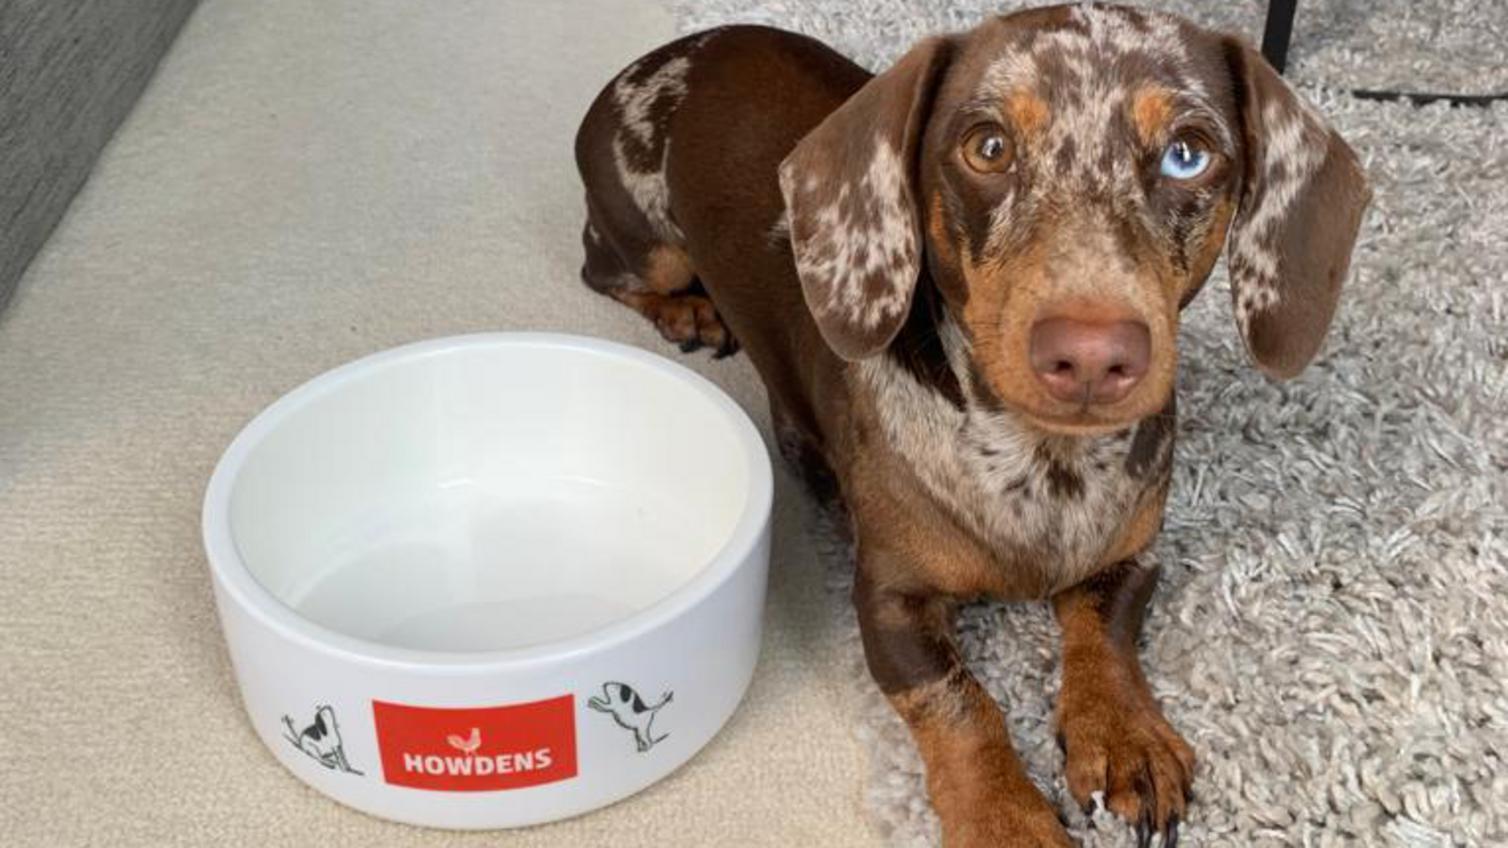 Howdens Hounds kitchen competition photo, featuring a dog sat indoors by a Howdens-branded bowl.